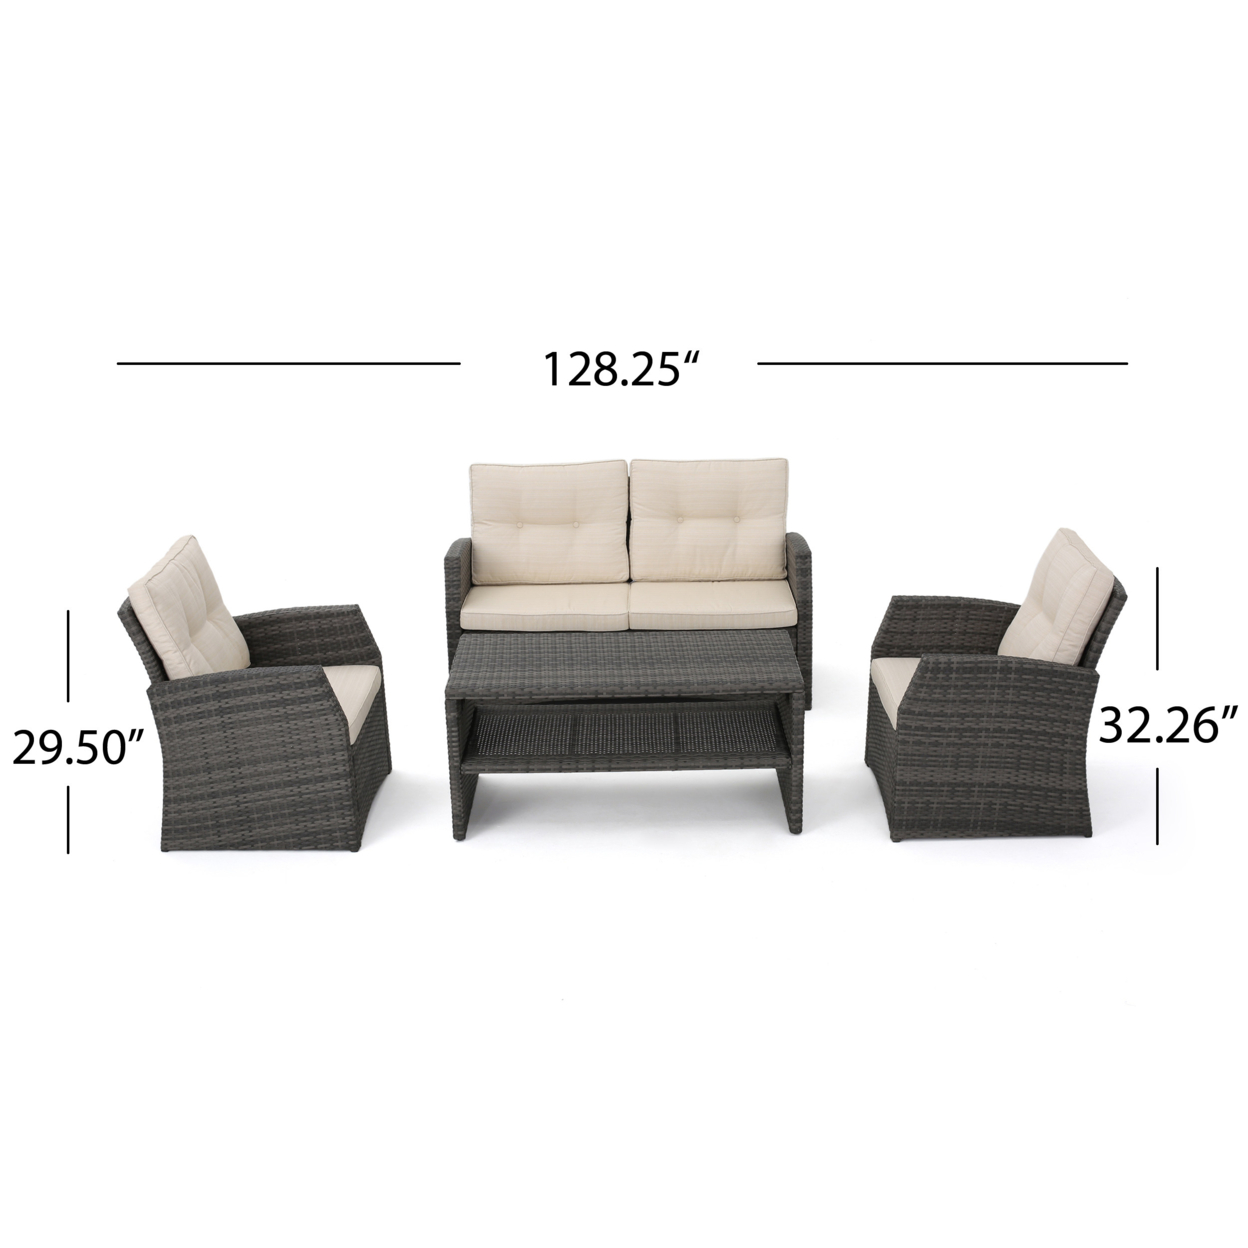 Del Norte Grey 4 Piece Outdoor Wicker Chat Set With Beige Water Resistant Cushions